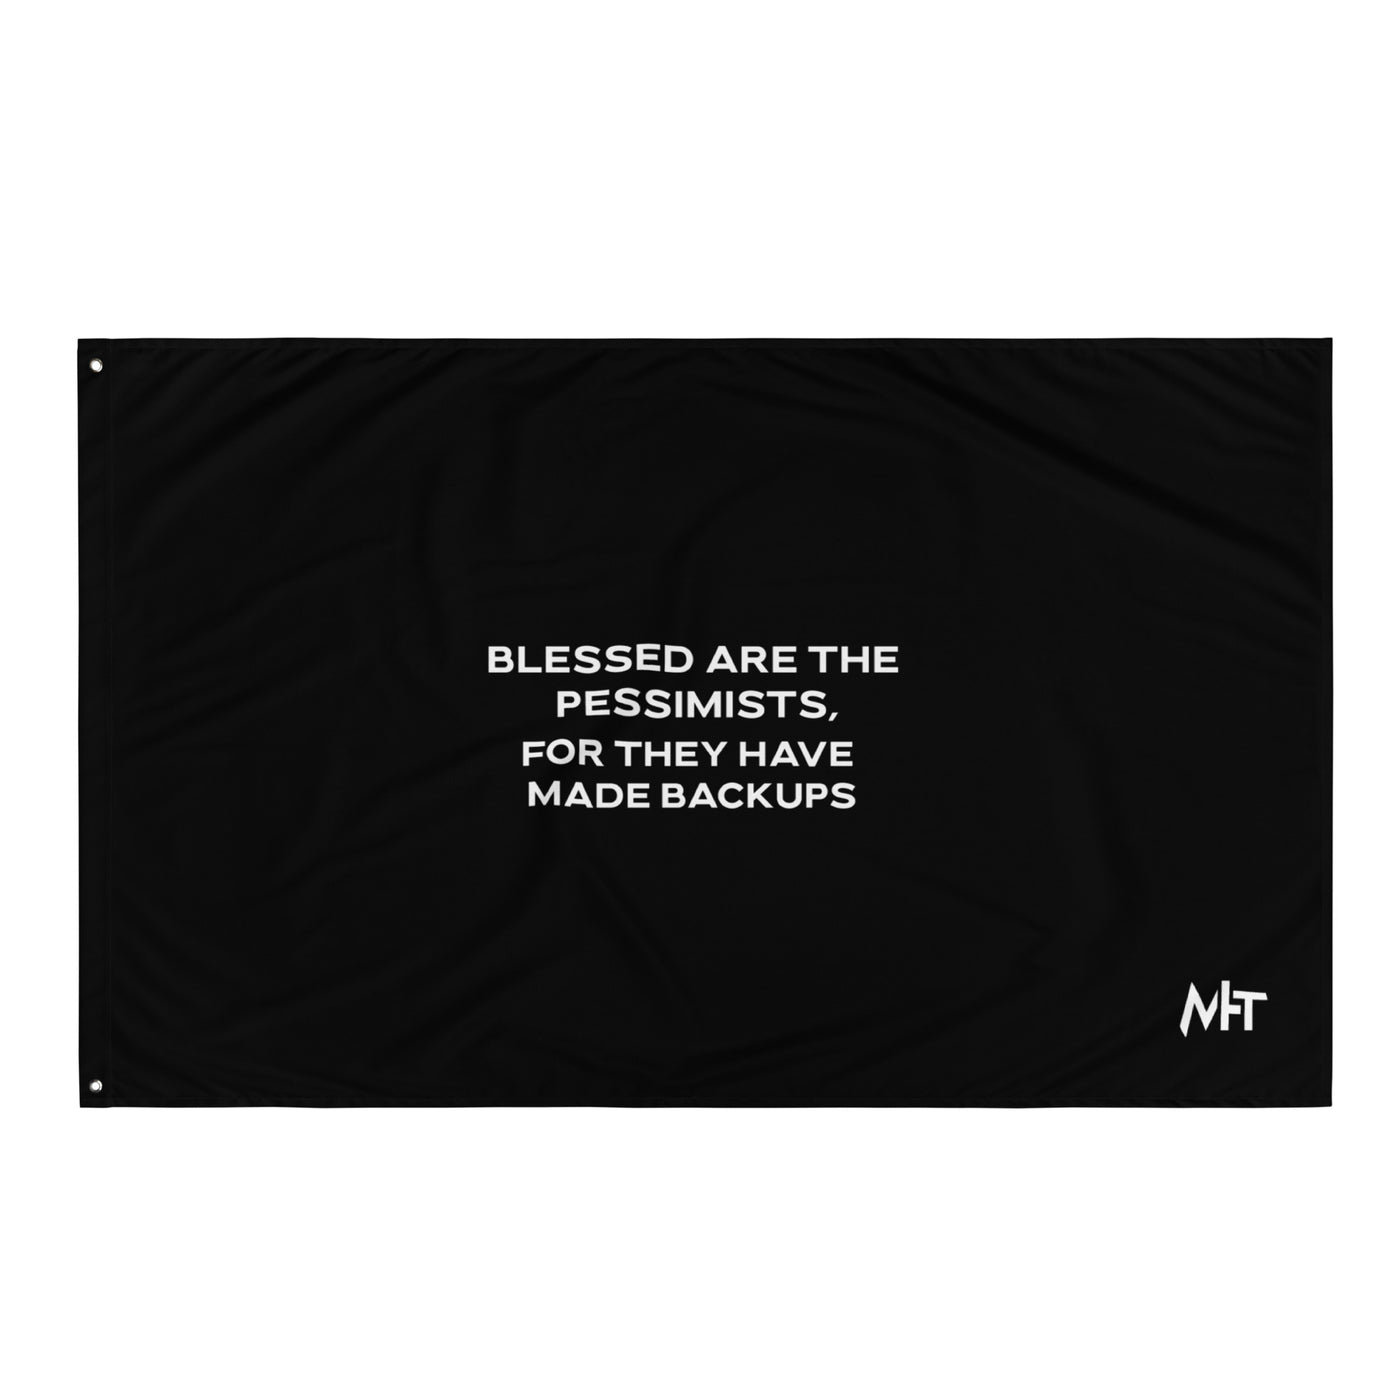 Blessed are the pessimists for they have made backups V2 - Flag